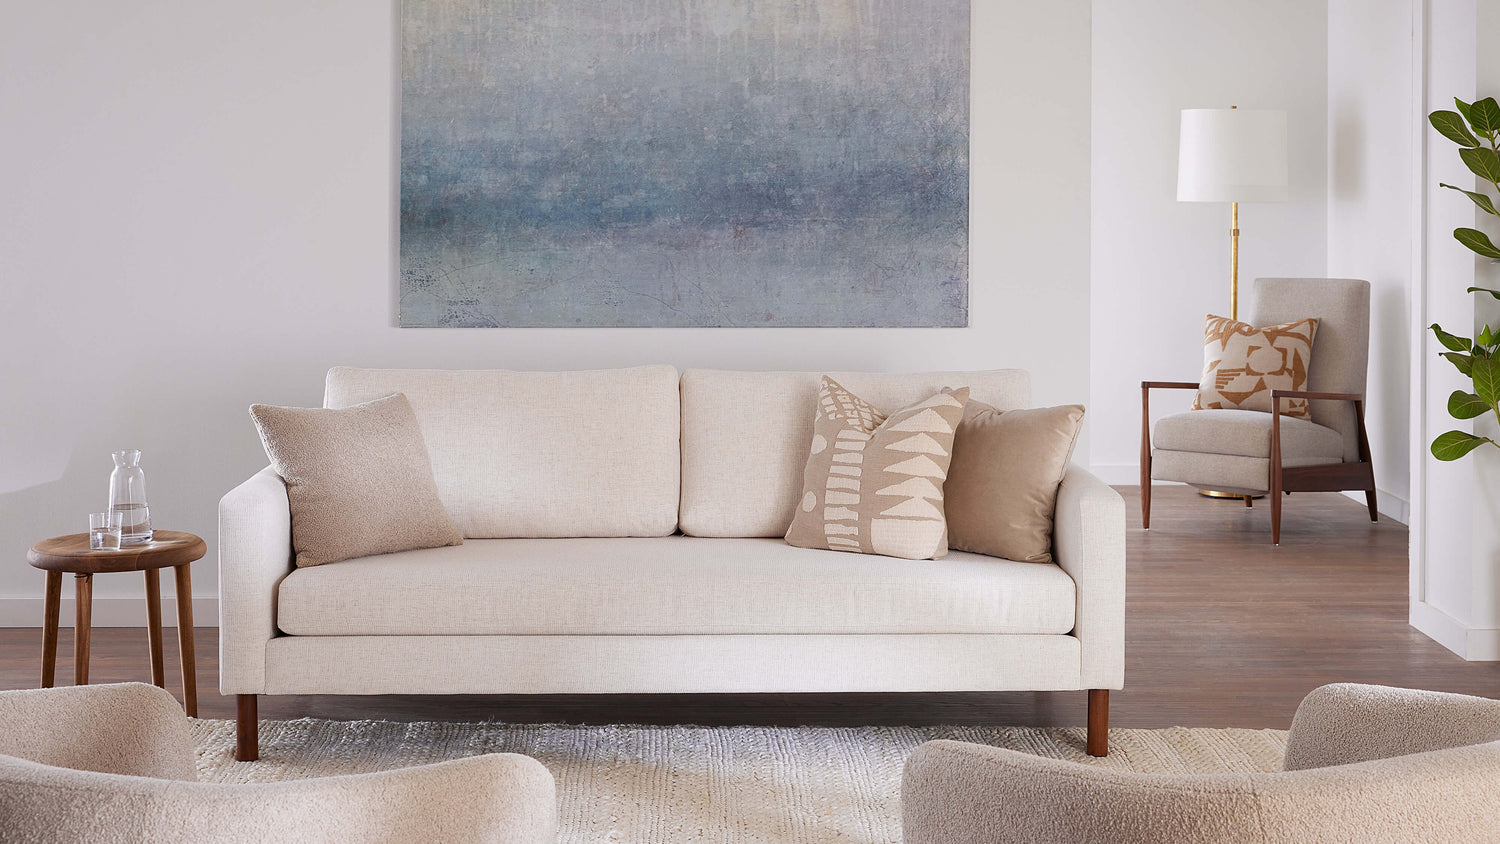 A minimalistic living room features a beige sofa with neutral-toned pillows, a round wooden side table with water glasses, and an abstract wall painting. In the background, a beige armchair, a floor lamp, and a leafy plant add to the serene atmosphere.